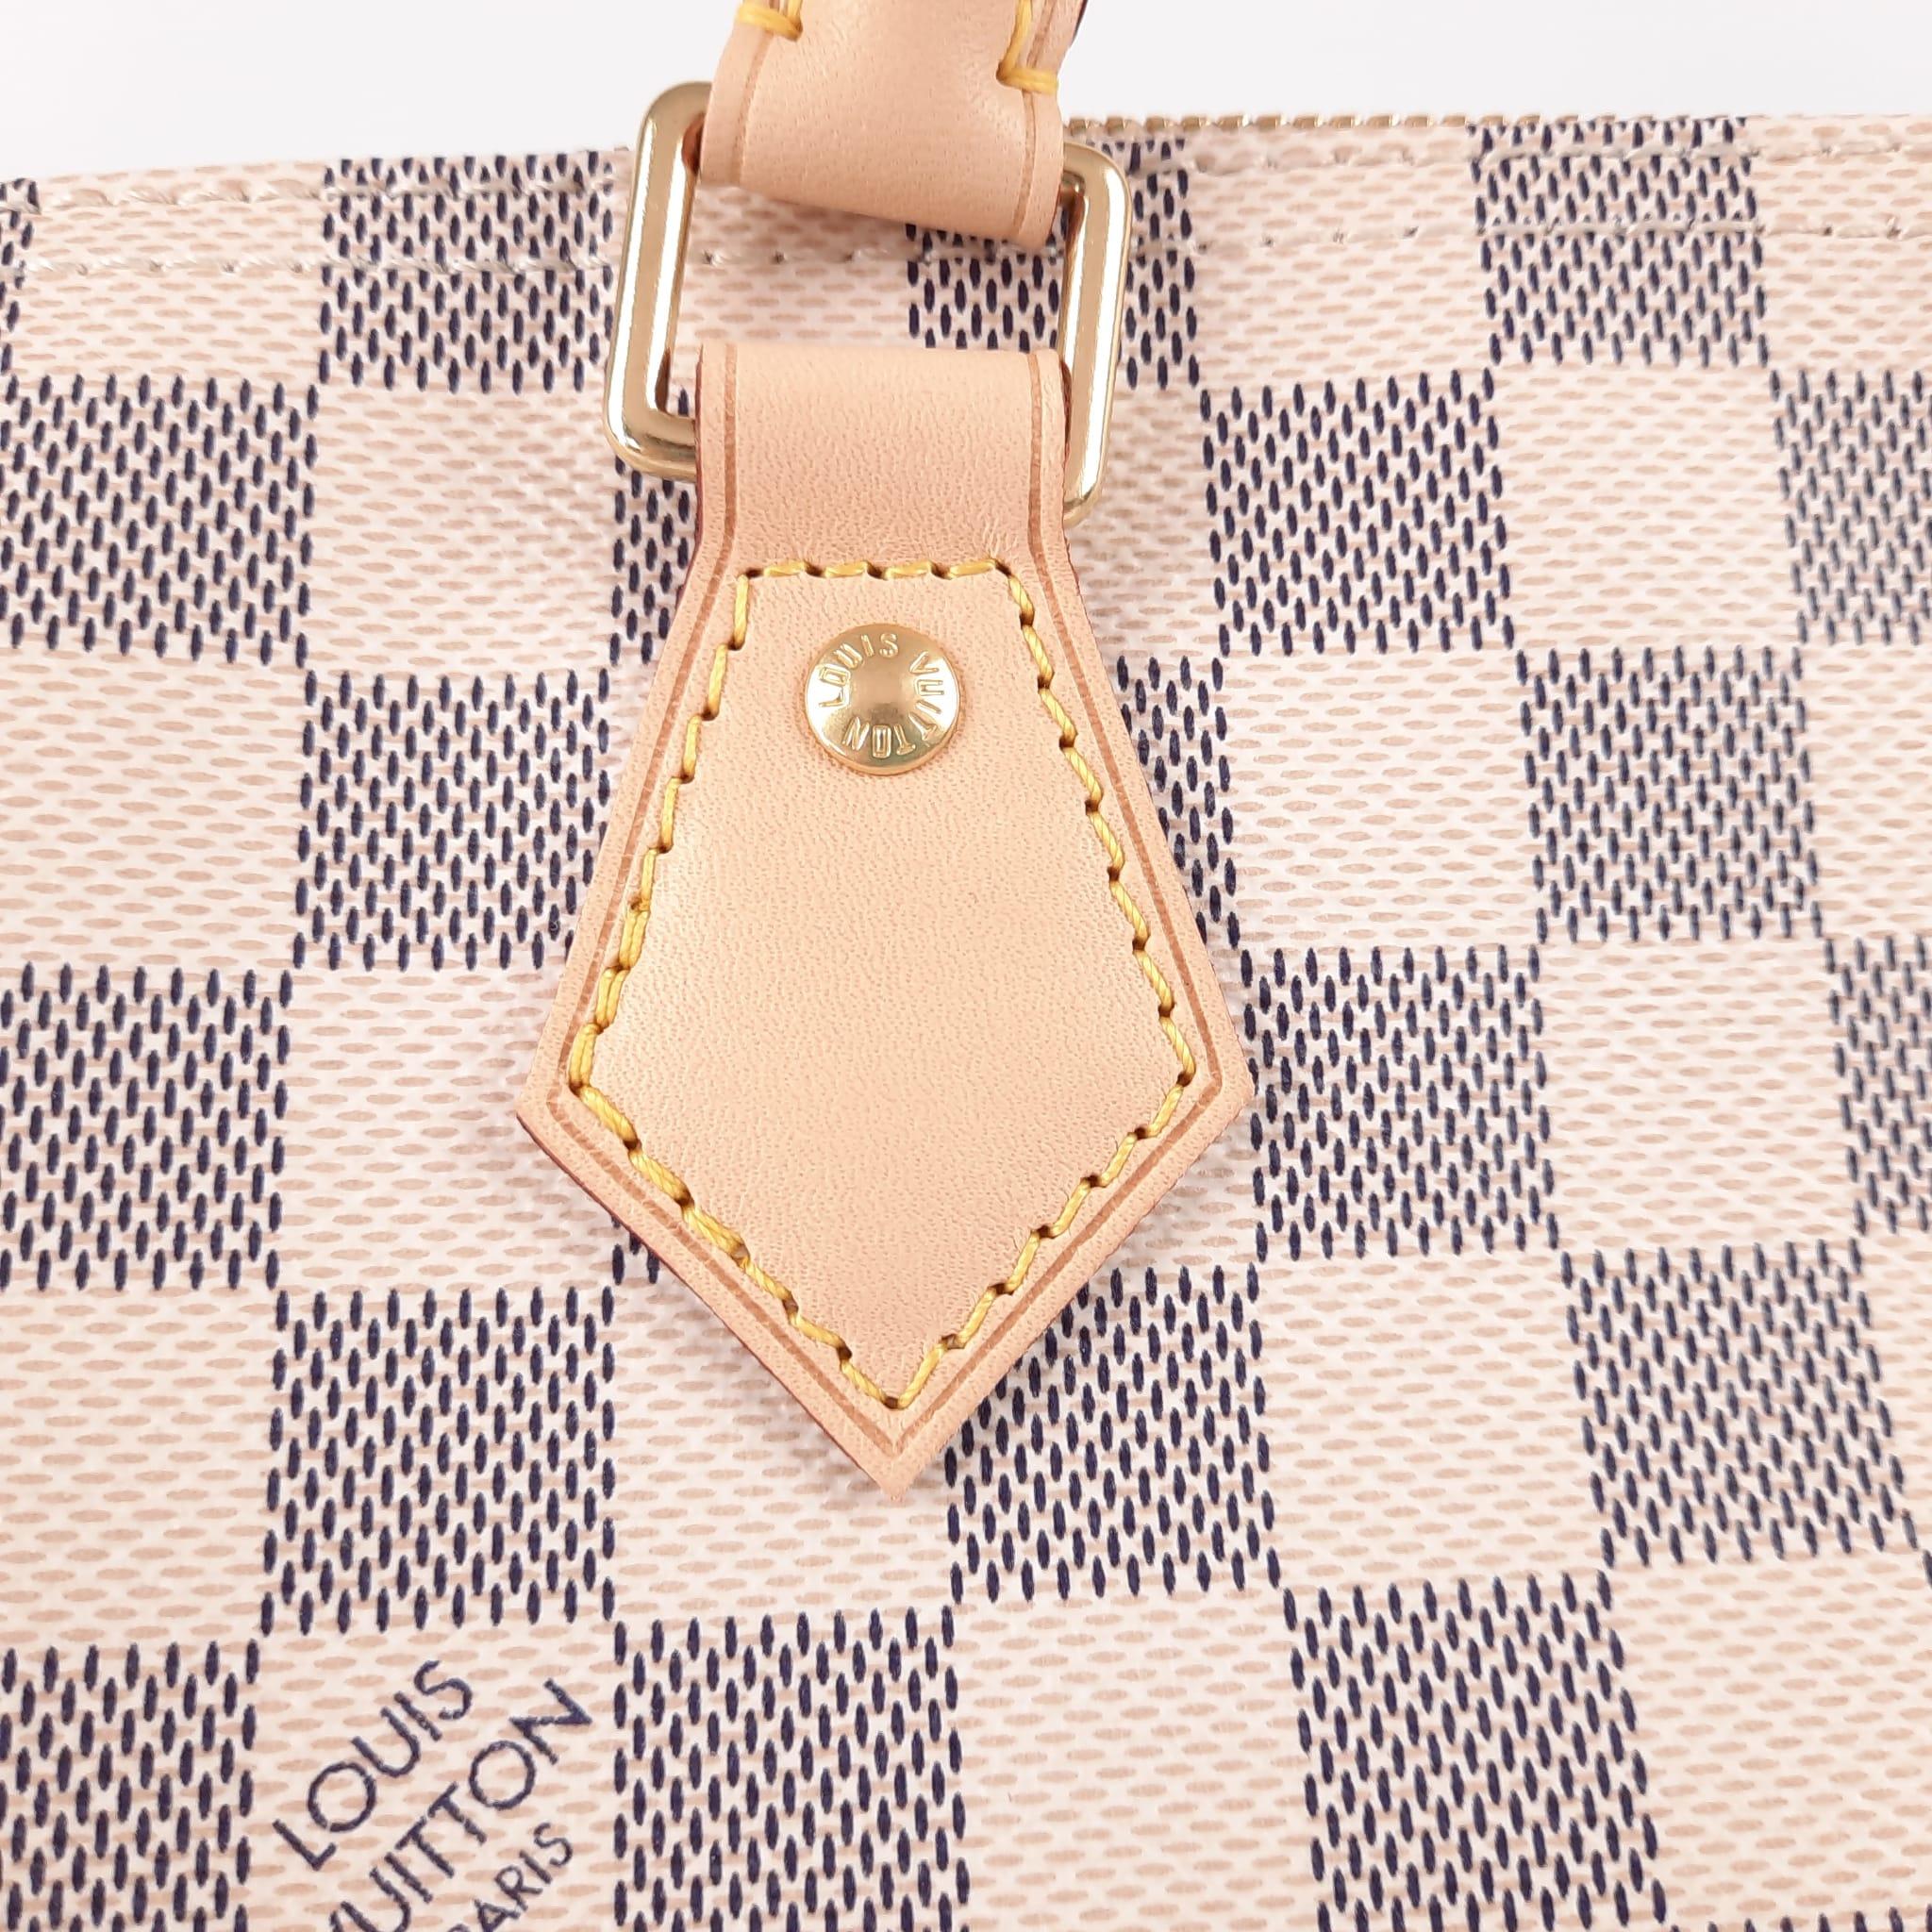 Fashioned from luminous Damier Azur canvas, the Speedy 30 is an elegant, compact handbag; a stylish companion for city life.
rolled leather handles and engraved, signature padlock.